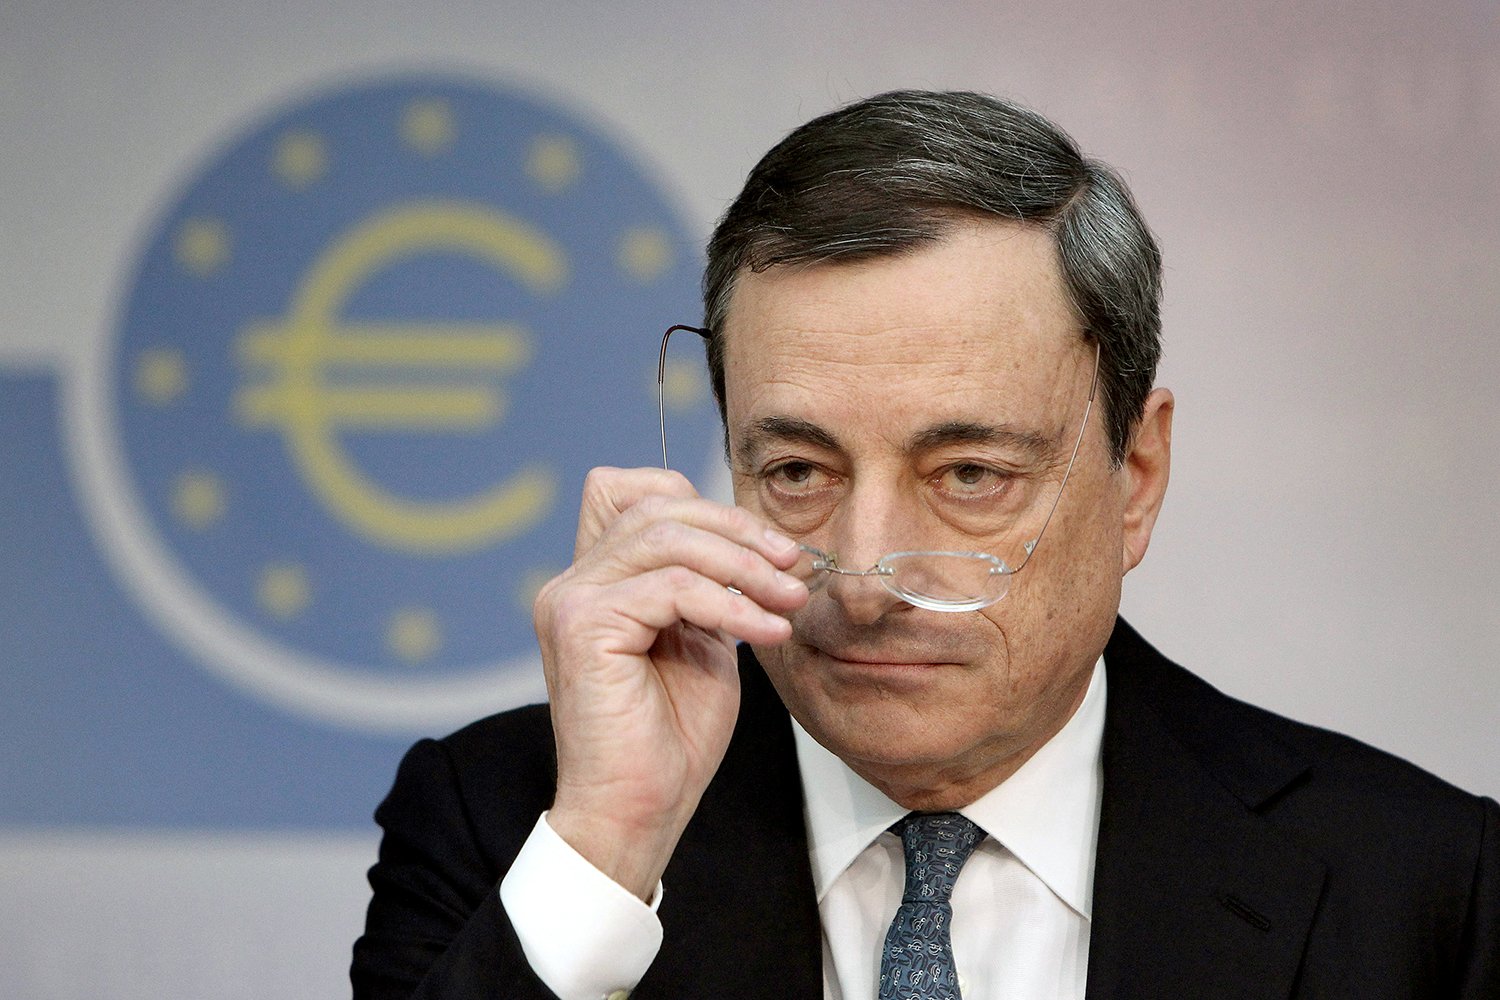 Mario Draghi Doesn't Have 'Whatever It Takes' to Save Italy